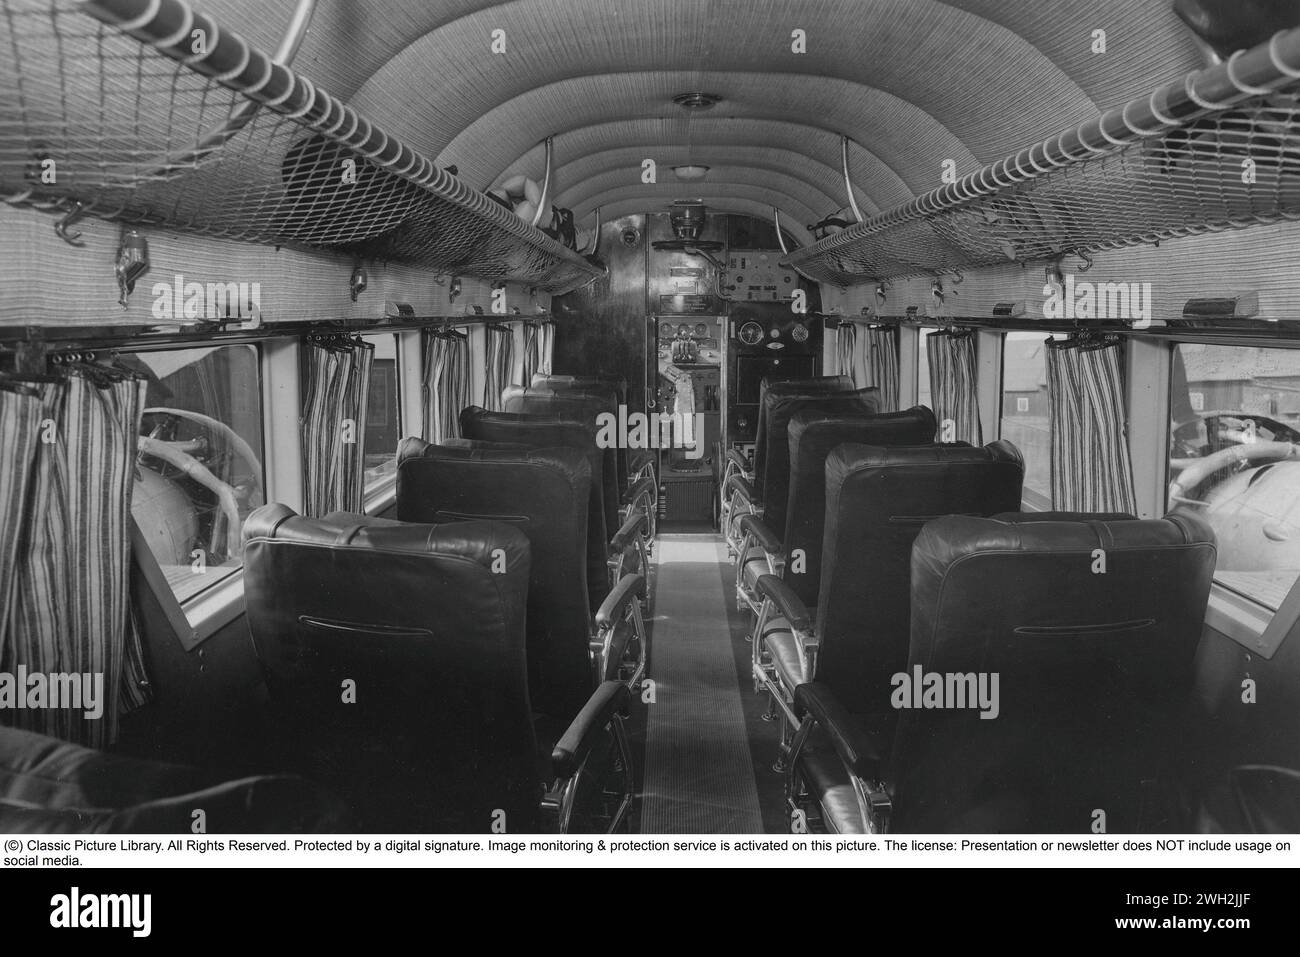 Aircraft interior of the 1930s. Interior of a Junkers Ju 52 aircraft with the cabin and seats, no passangers, 1935 Stock Photo